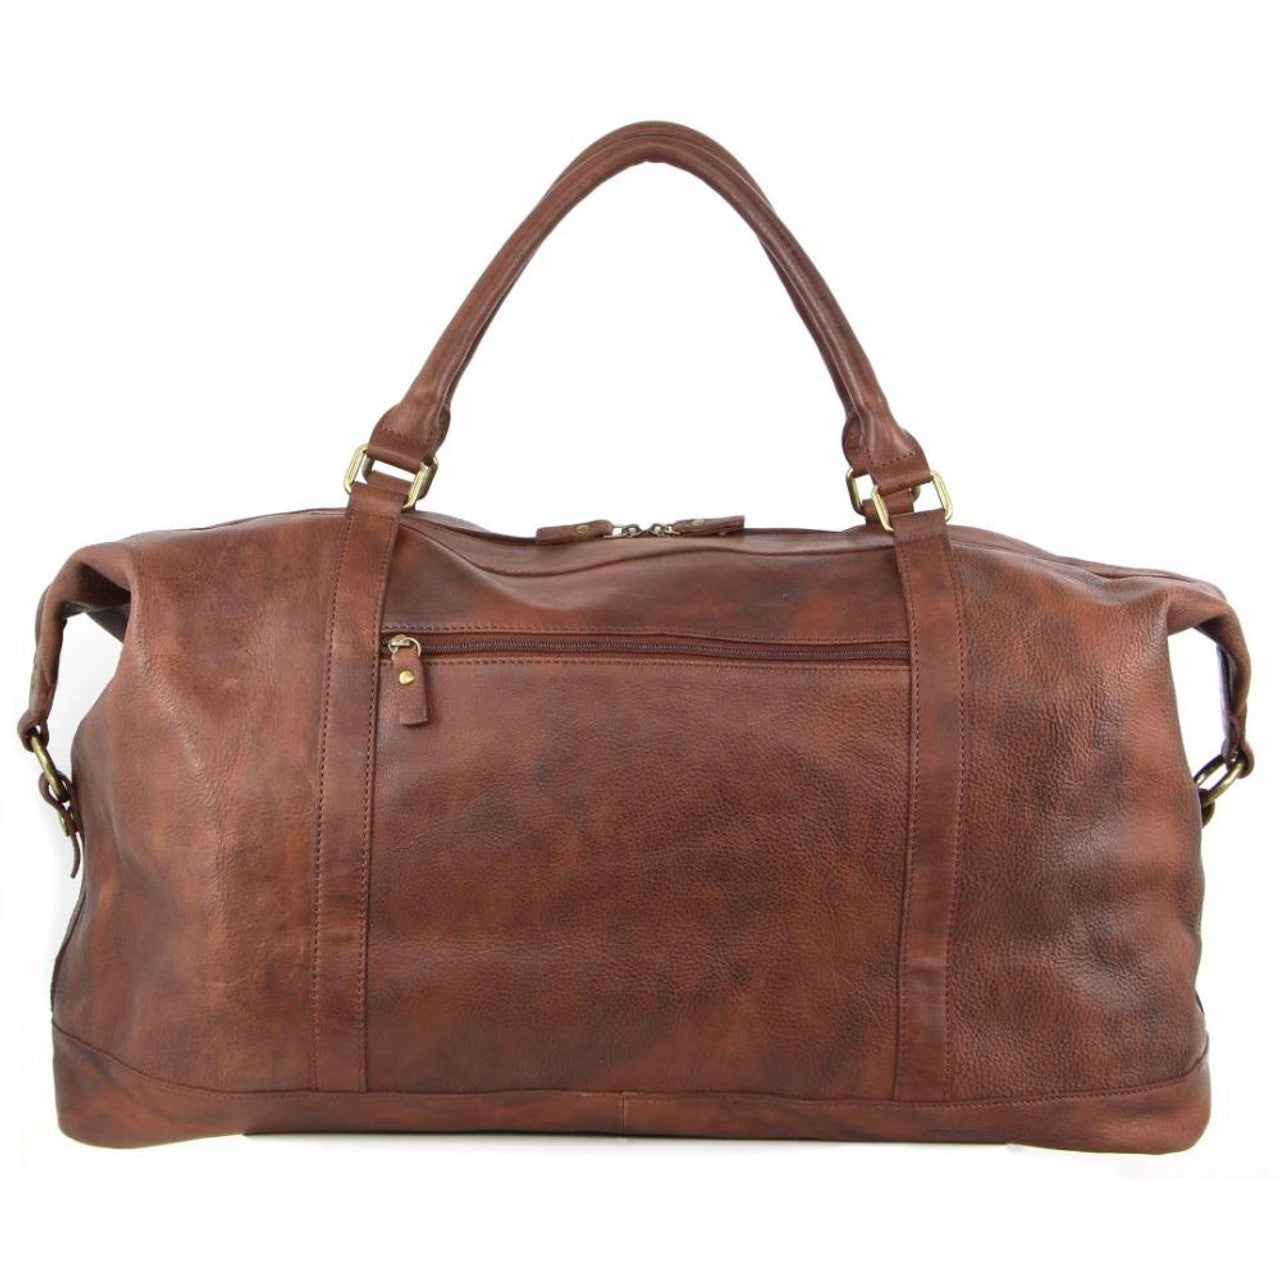 Pierre Cardin Rustic Leather Overnight Bag with front flap pocket PC3134 Chesnut-3